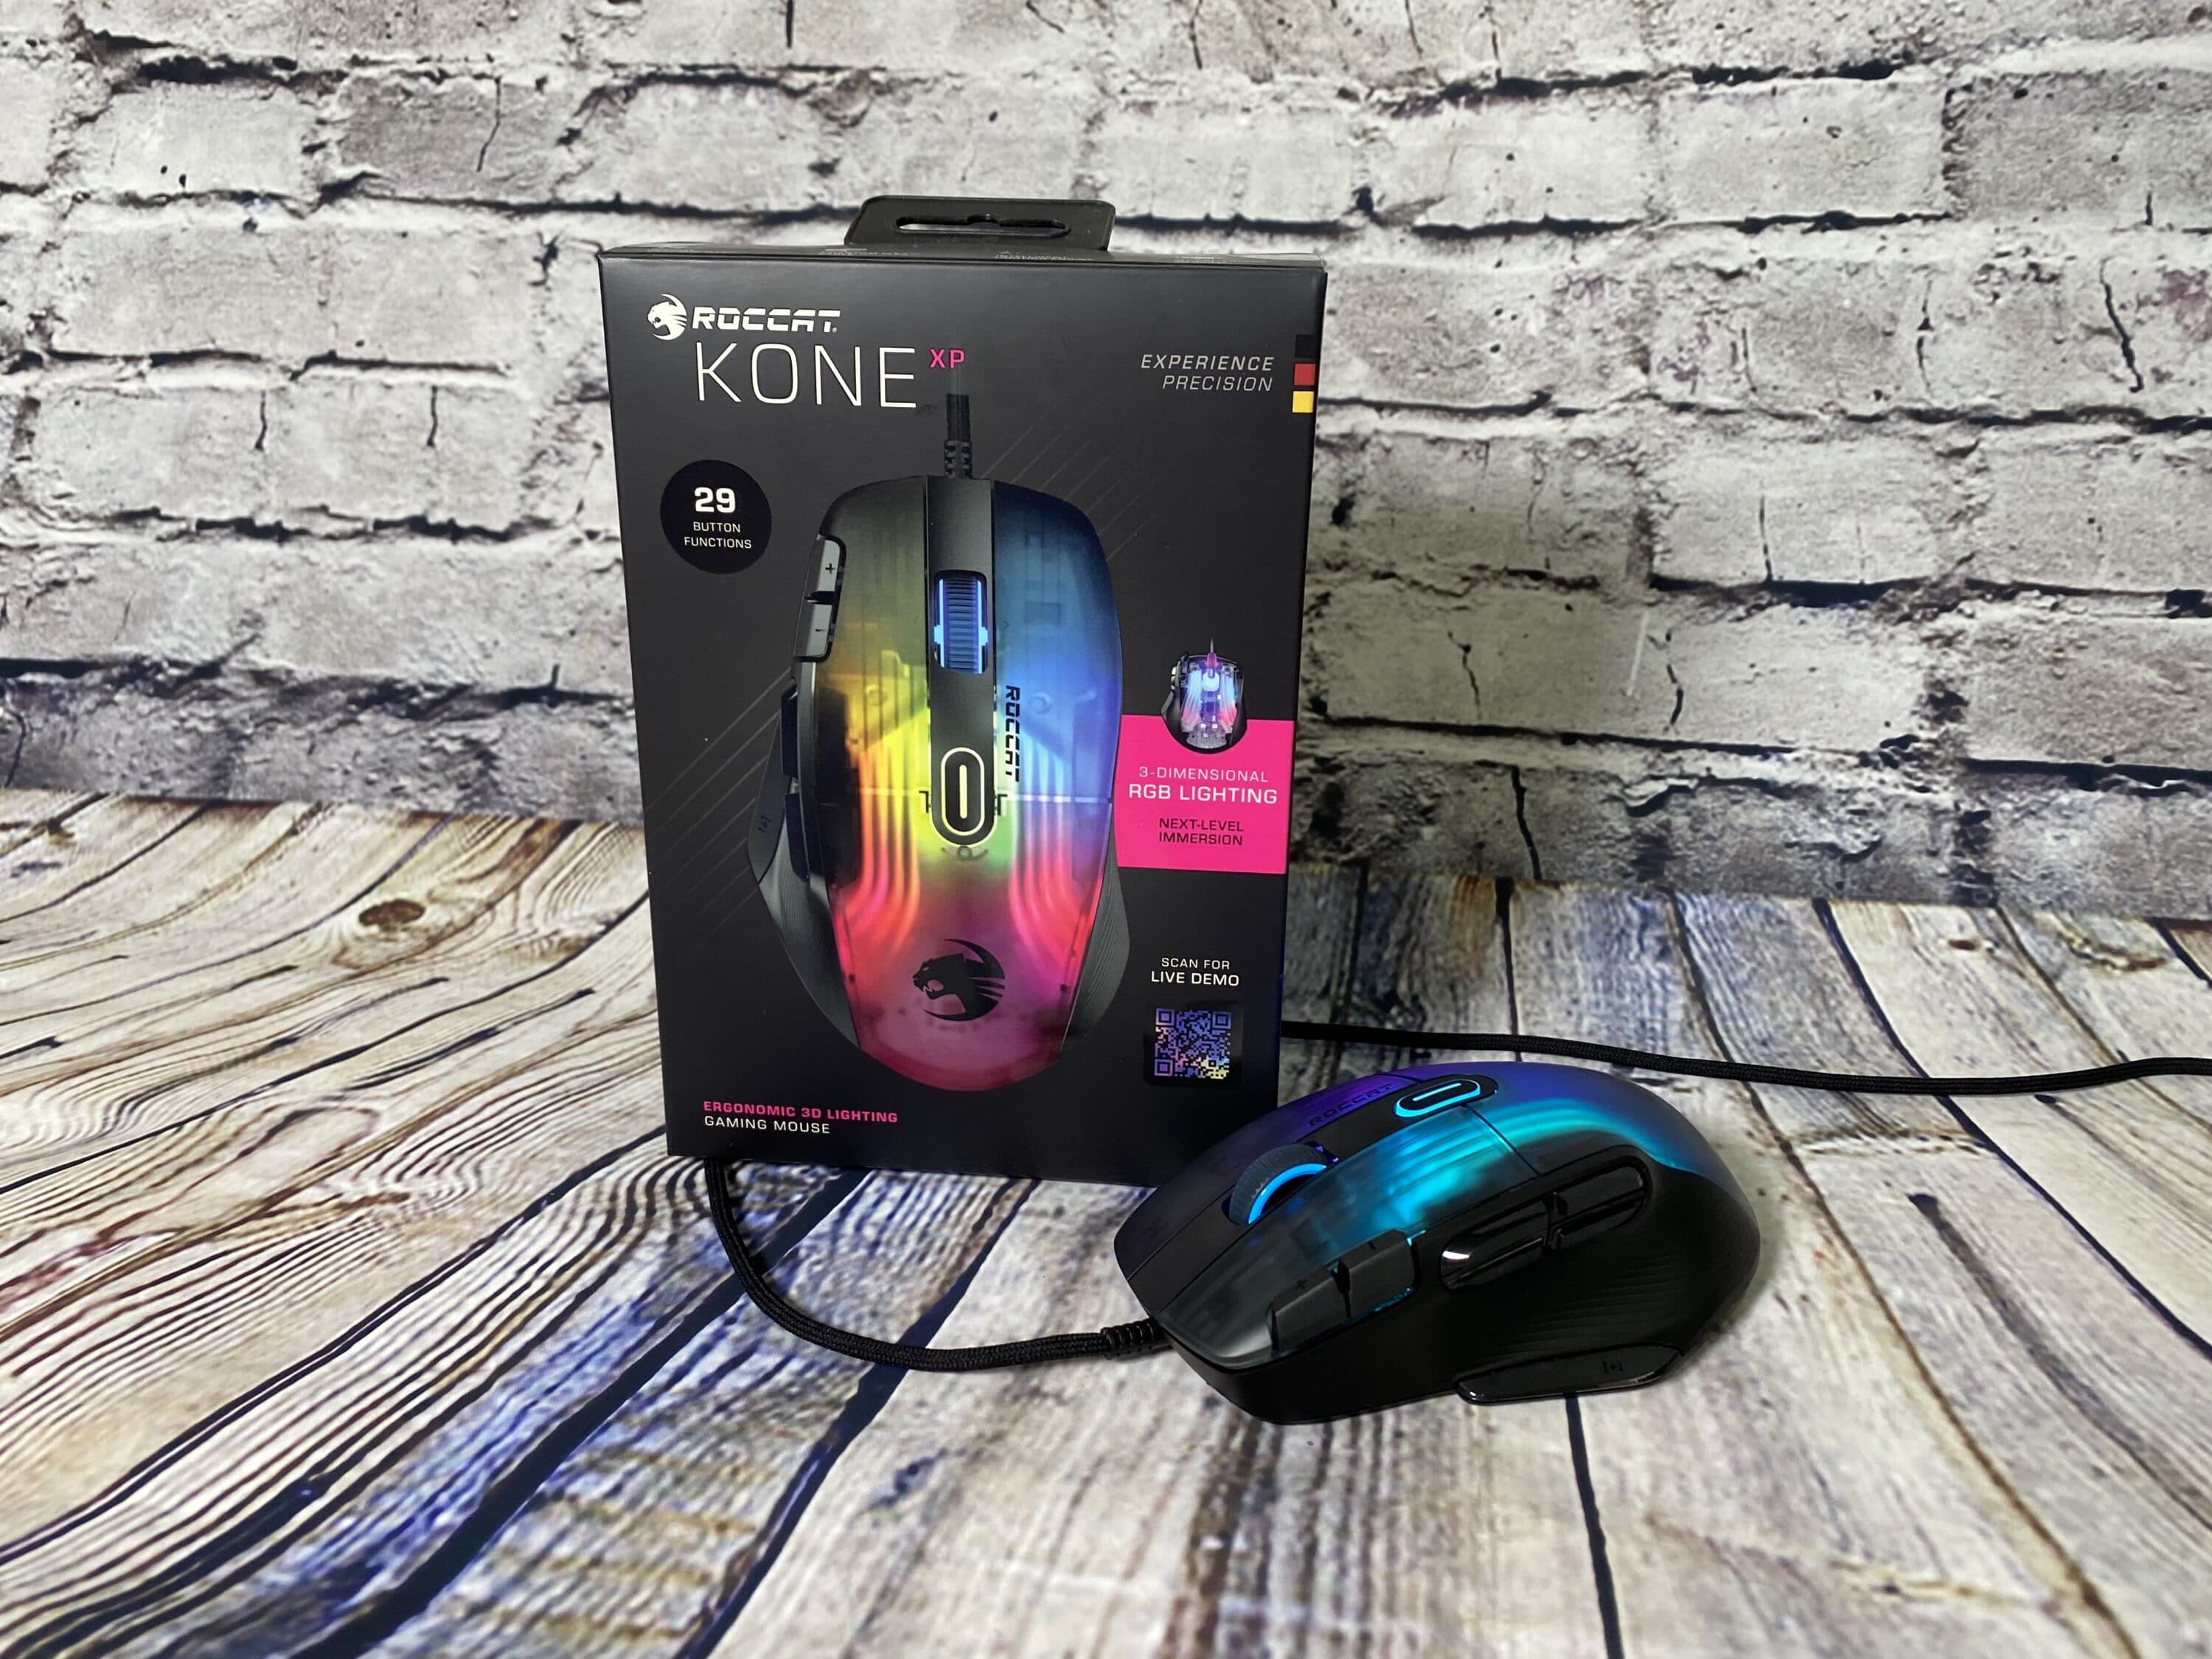 ROCCAT Kone XP review - mouse gaming 29 possible actions with button